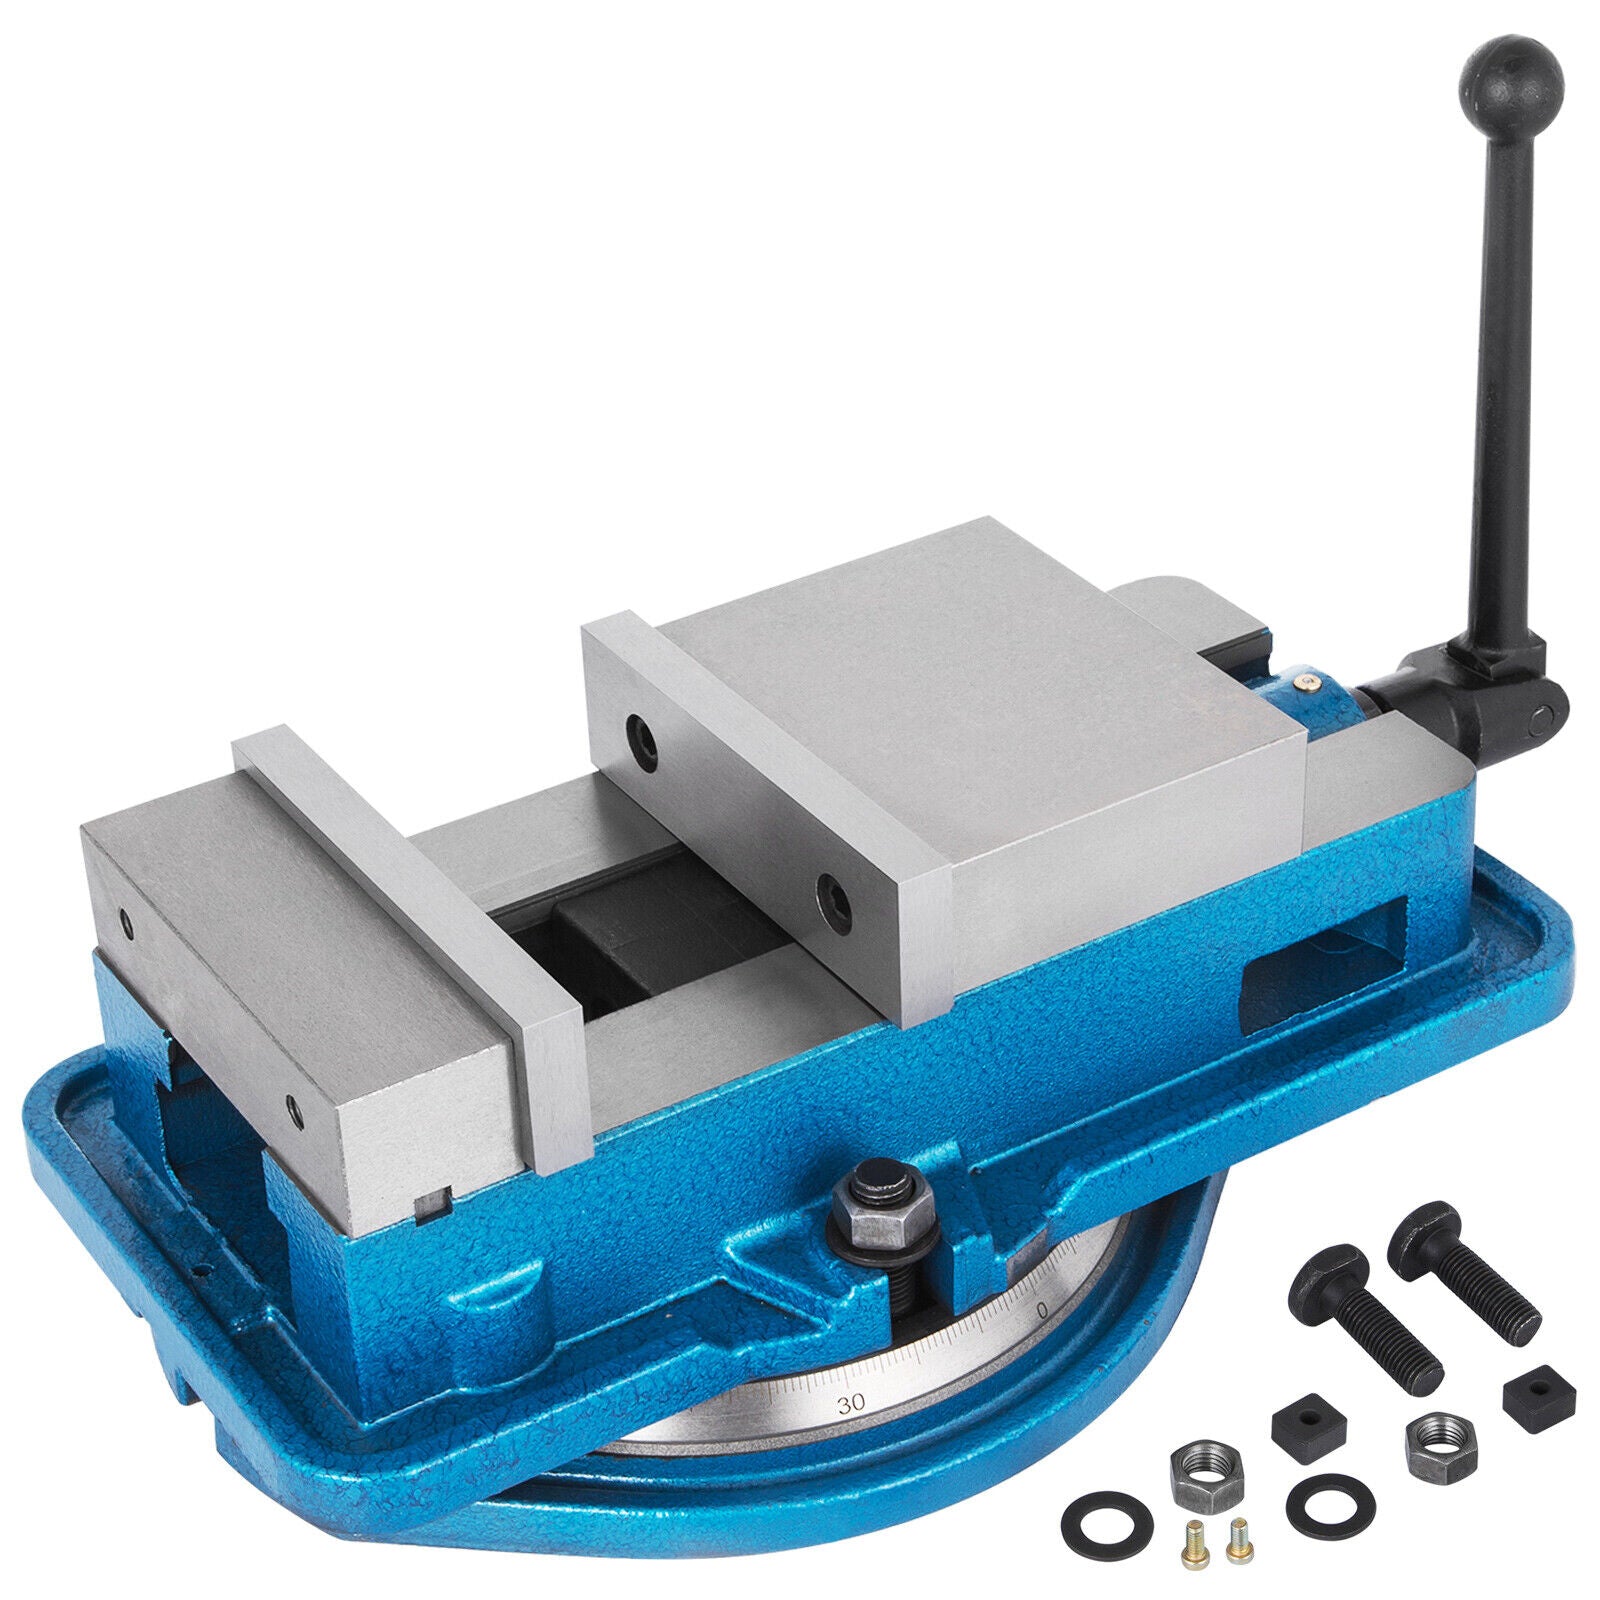 5"/125mm Milling Machine Lockdown Vise with 360° Swivel Base Precision Vise